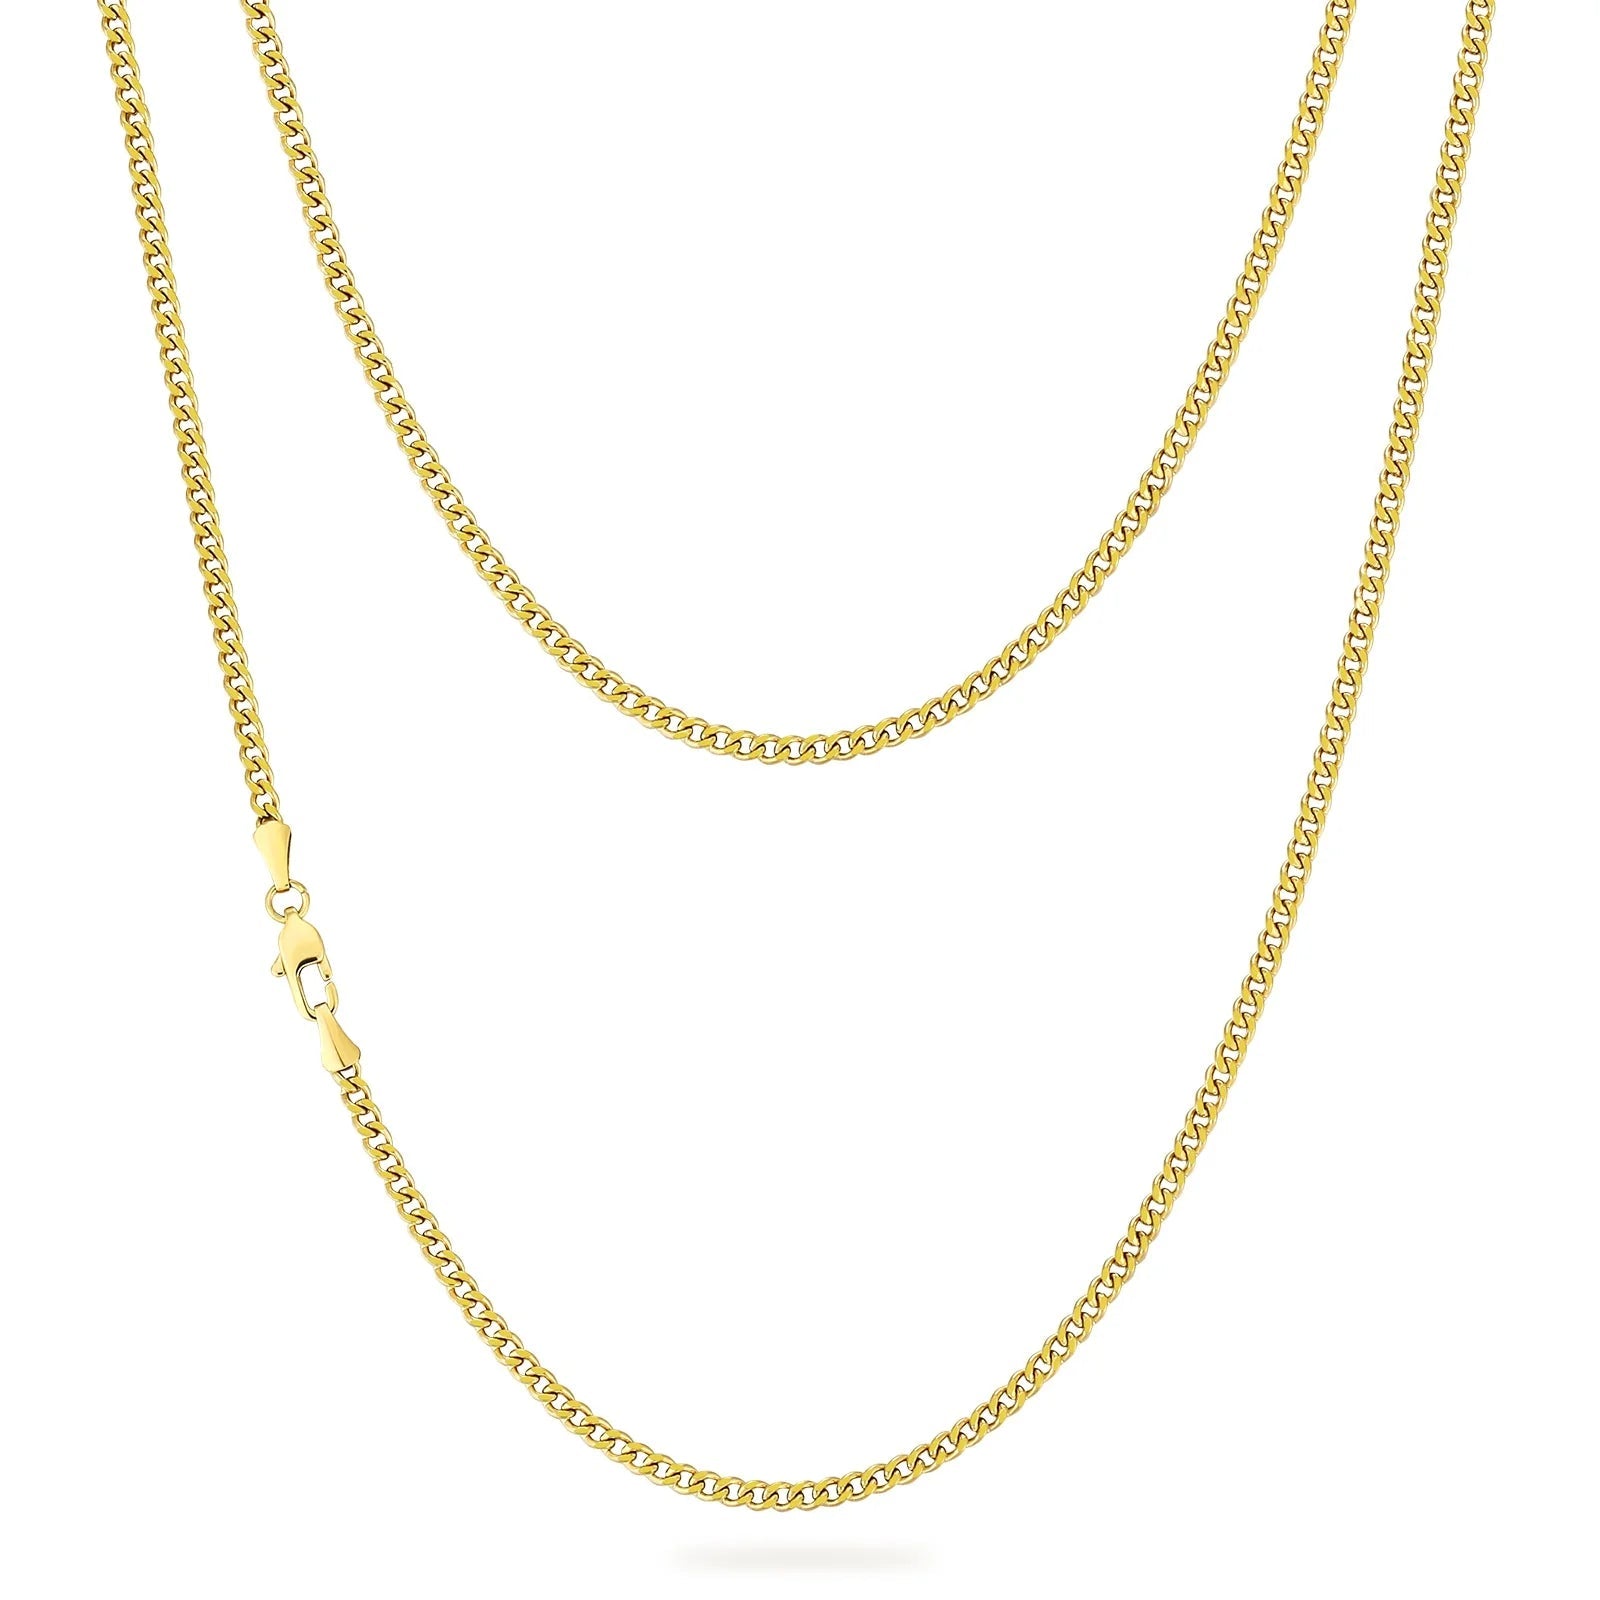 3mm Miami Cuban Link Chain in 14K Gold Necklaces 